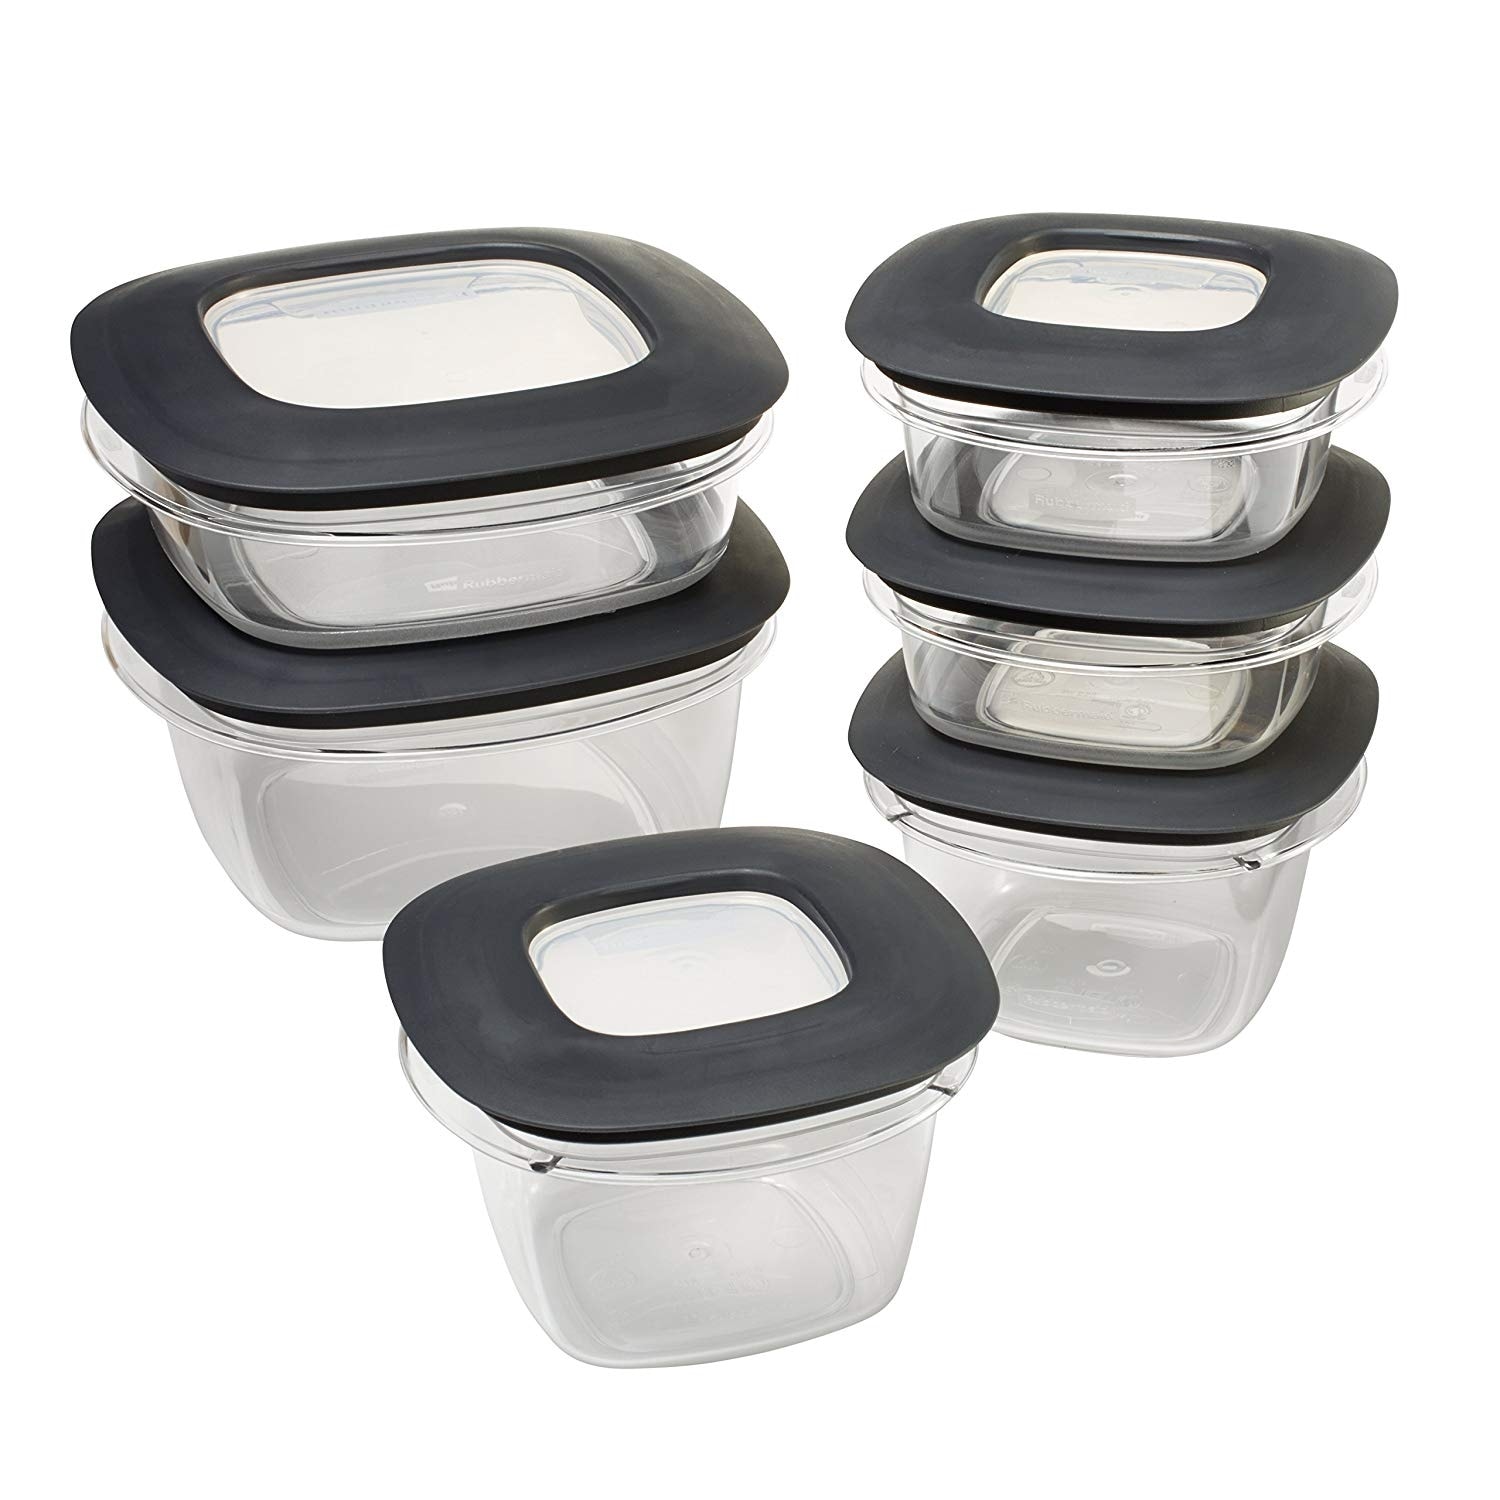 https://ak1.ostkcdn.com/images/products/is/images/direct/2416b235c9c379fa58f9d64deb8751376b17aacf/Rubbermaid-Premier-Easy-Find-Lids-Meal-Prep-and-Food-Storage-Containers%2C-Set-of-6%2C-Grey.jpg